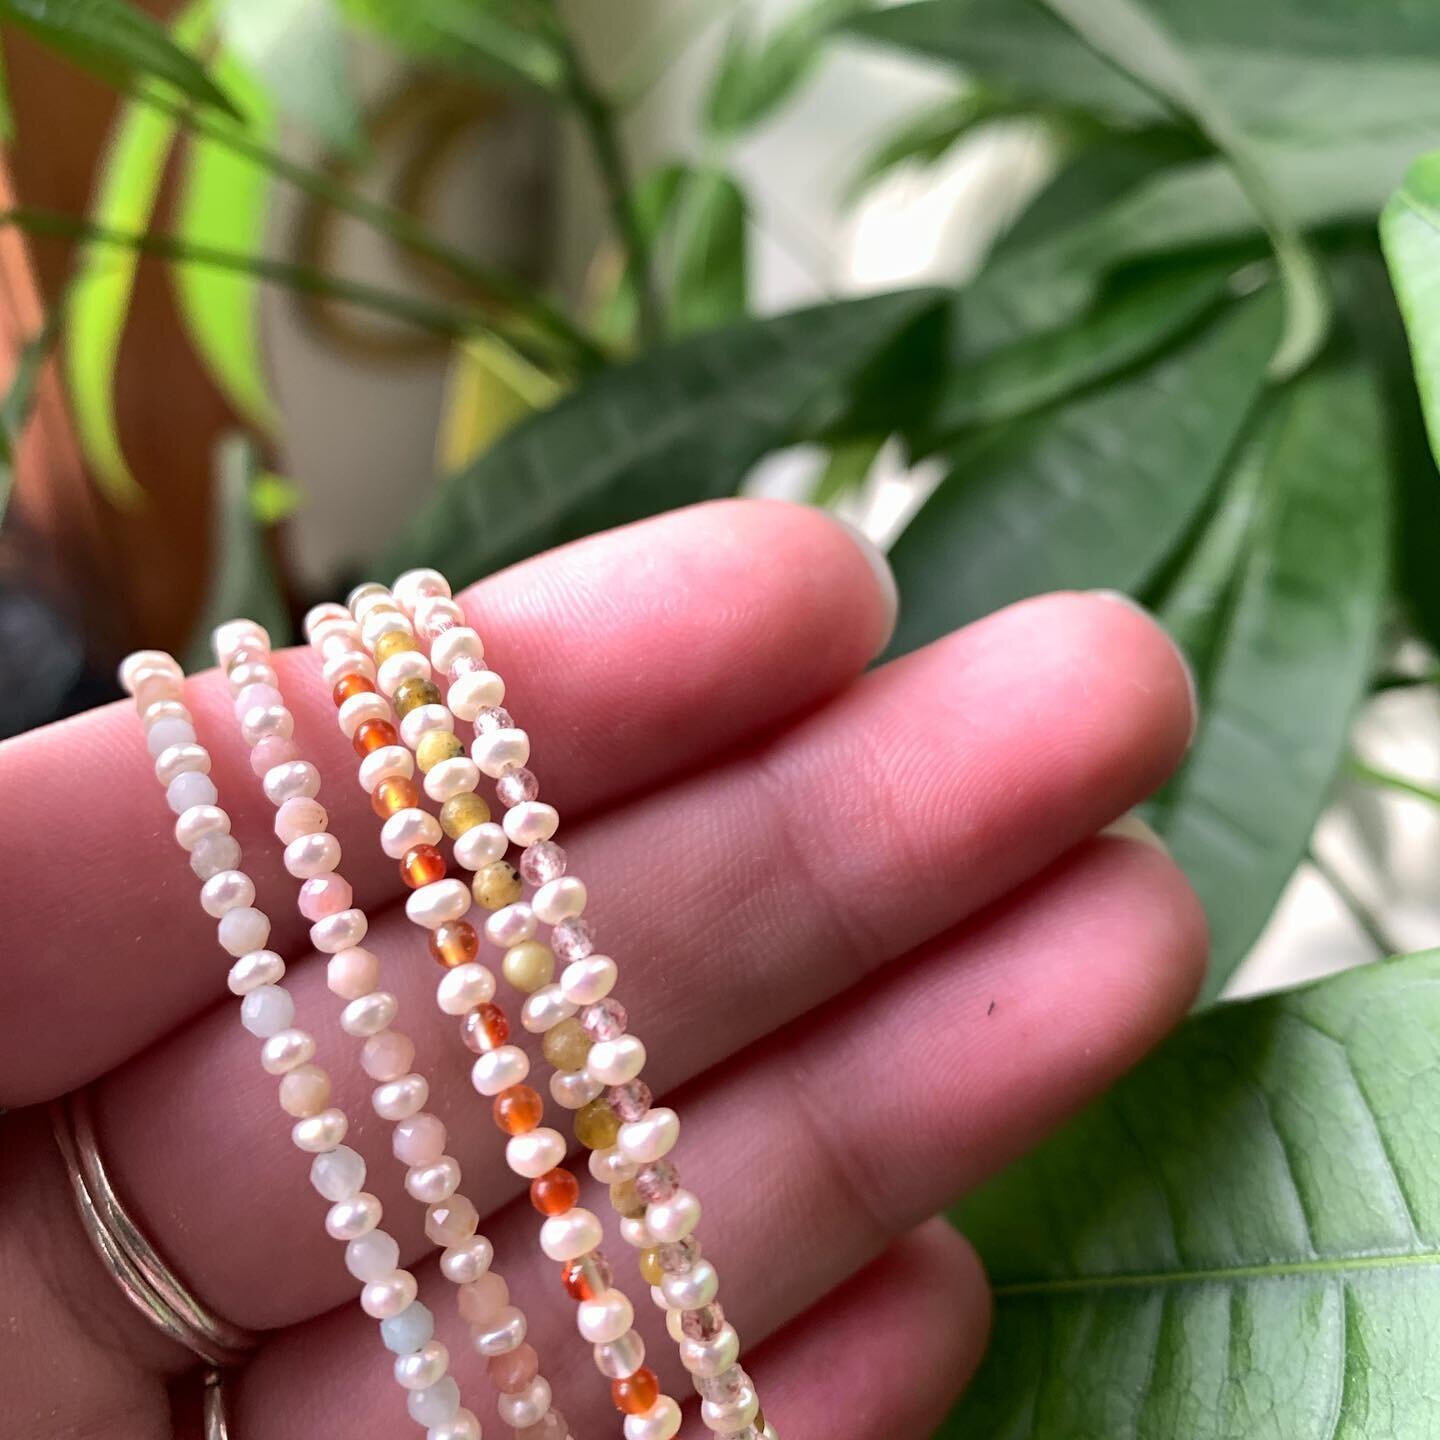 check out our new pieces of jewellery that have just launched online 💗🌟

heaps of new semi-precious stones from my recent trips to honolulu and melbourne, &amp; freshwater pearls too, of course! 

I hope you love them as much as I do! xoxo